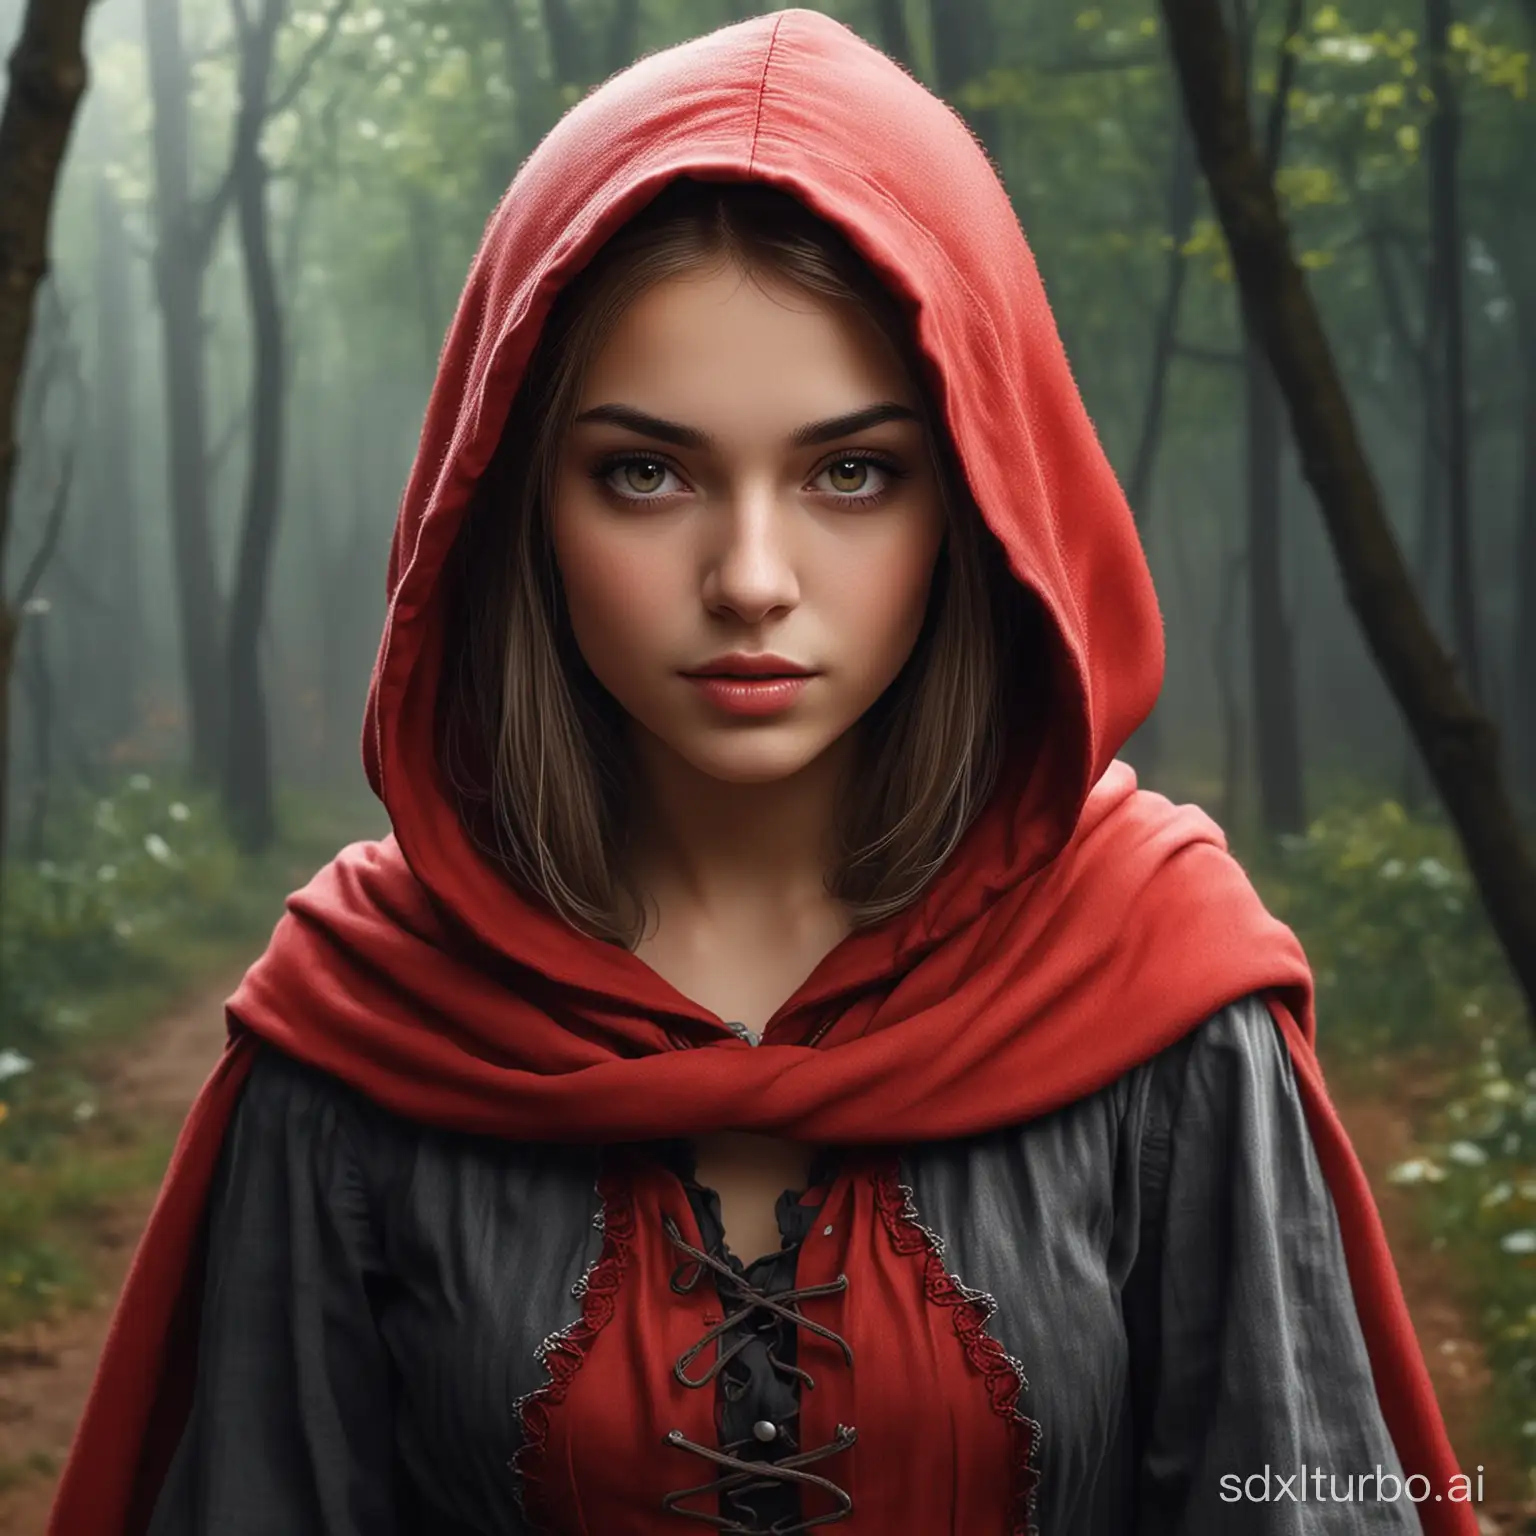 little red Riding hood, fairy tale character, beautiful girl, fantasy, realistic high quality image